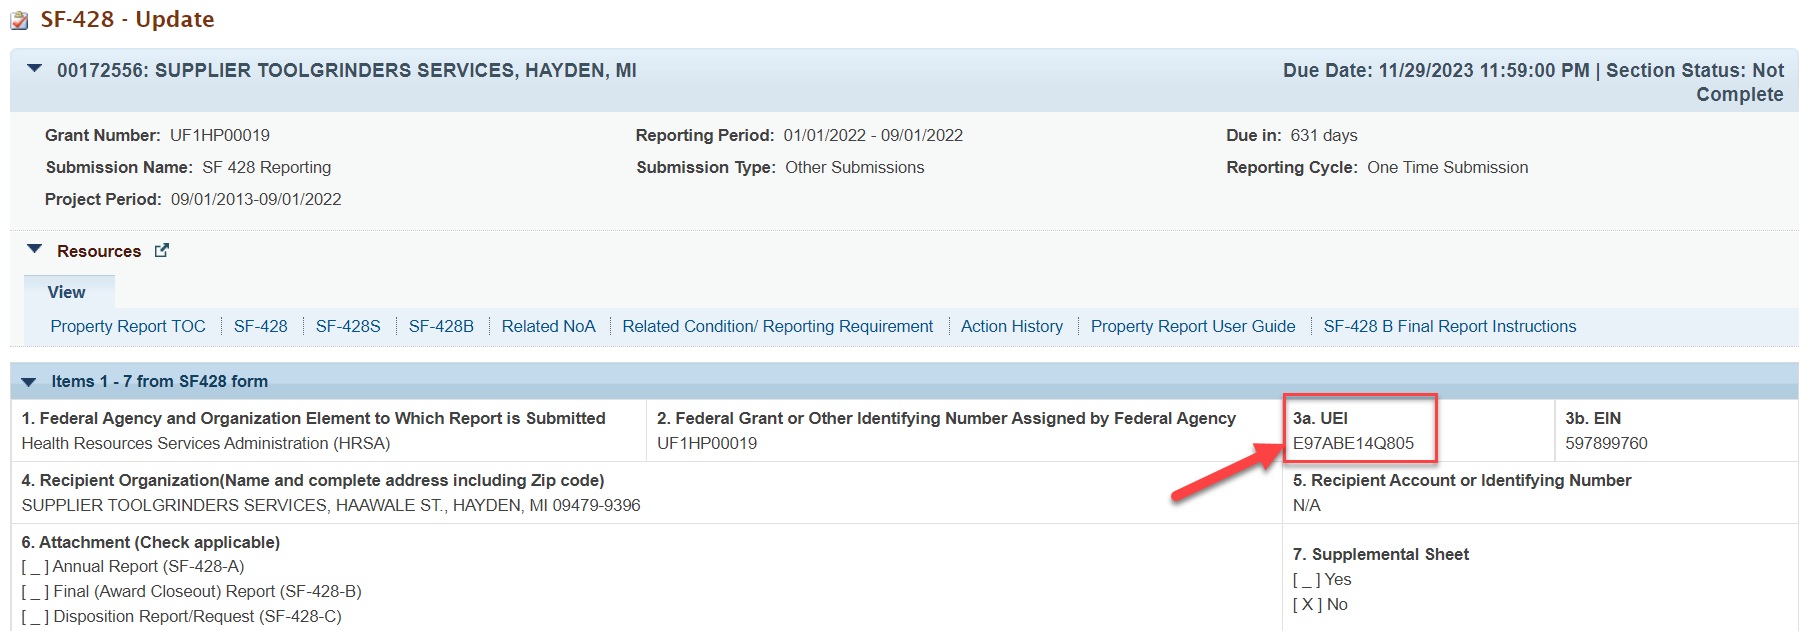 Screenshot of the Property Tracking Forms SF428 update page showing the UEI field